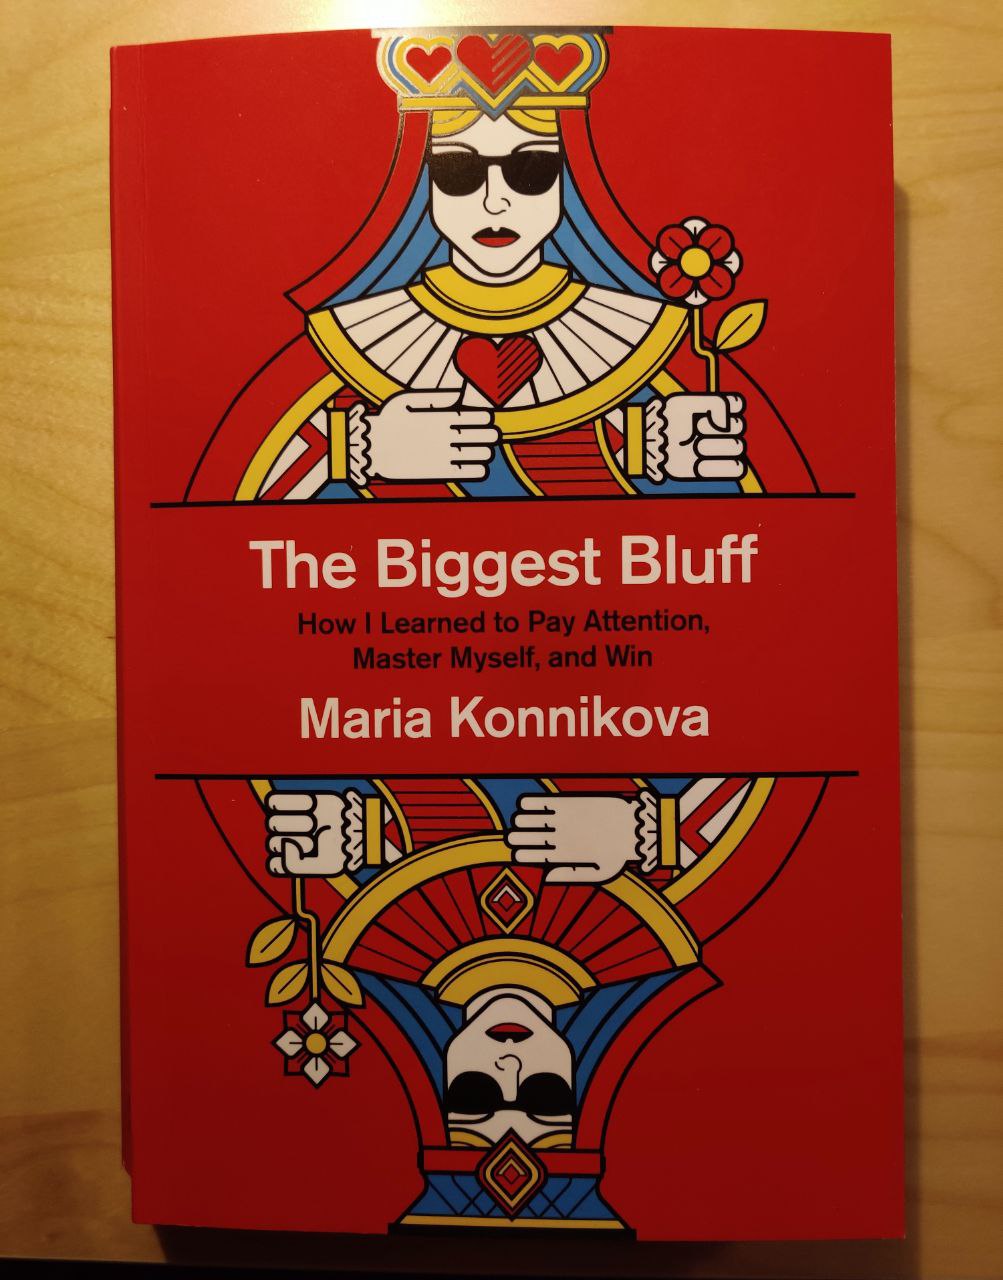 “The Biggest Bluff” cover